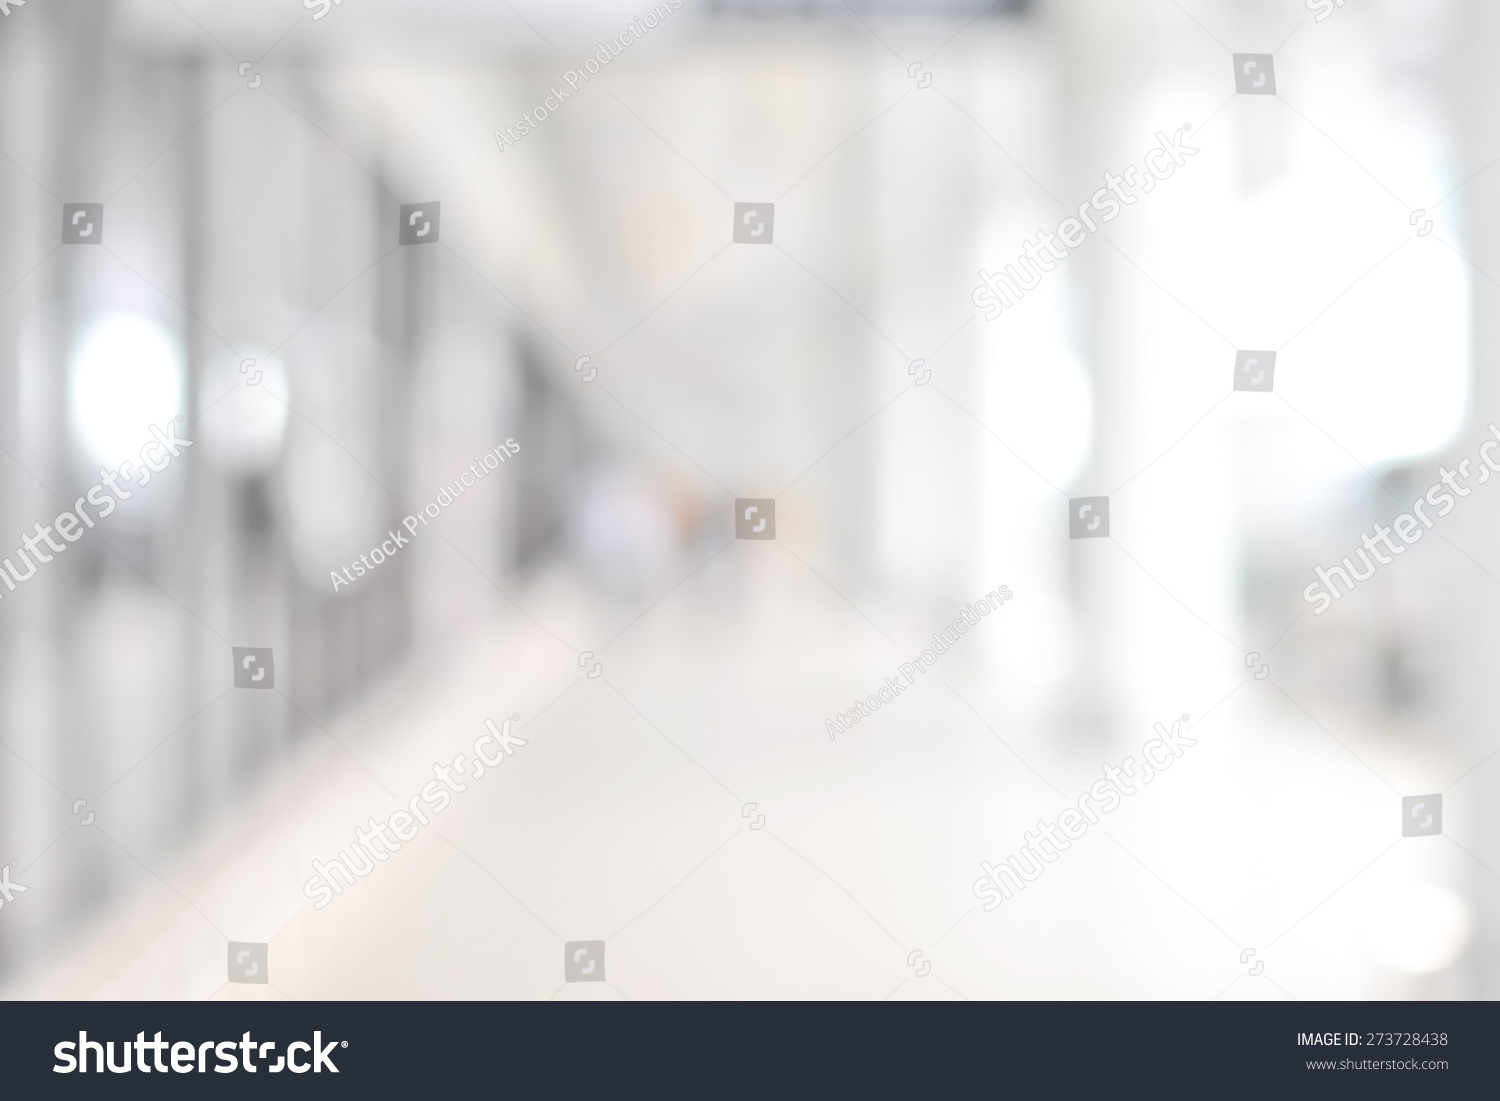 White blur abstract background from building hallway (corridor) #273728438